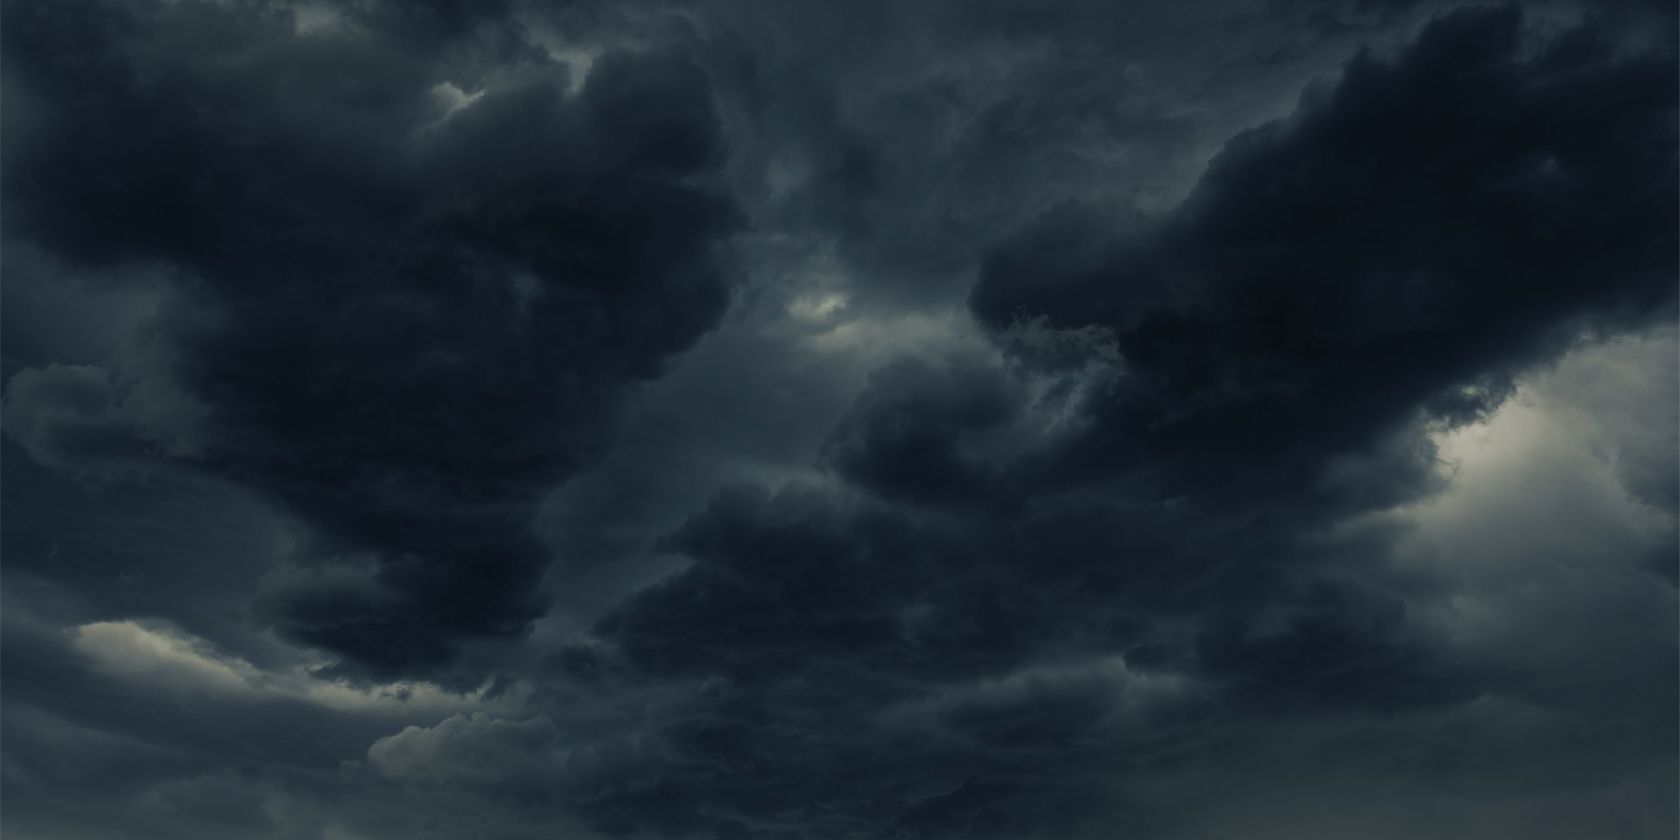 Suncorp Group responds to severe Victorian weather event